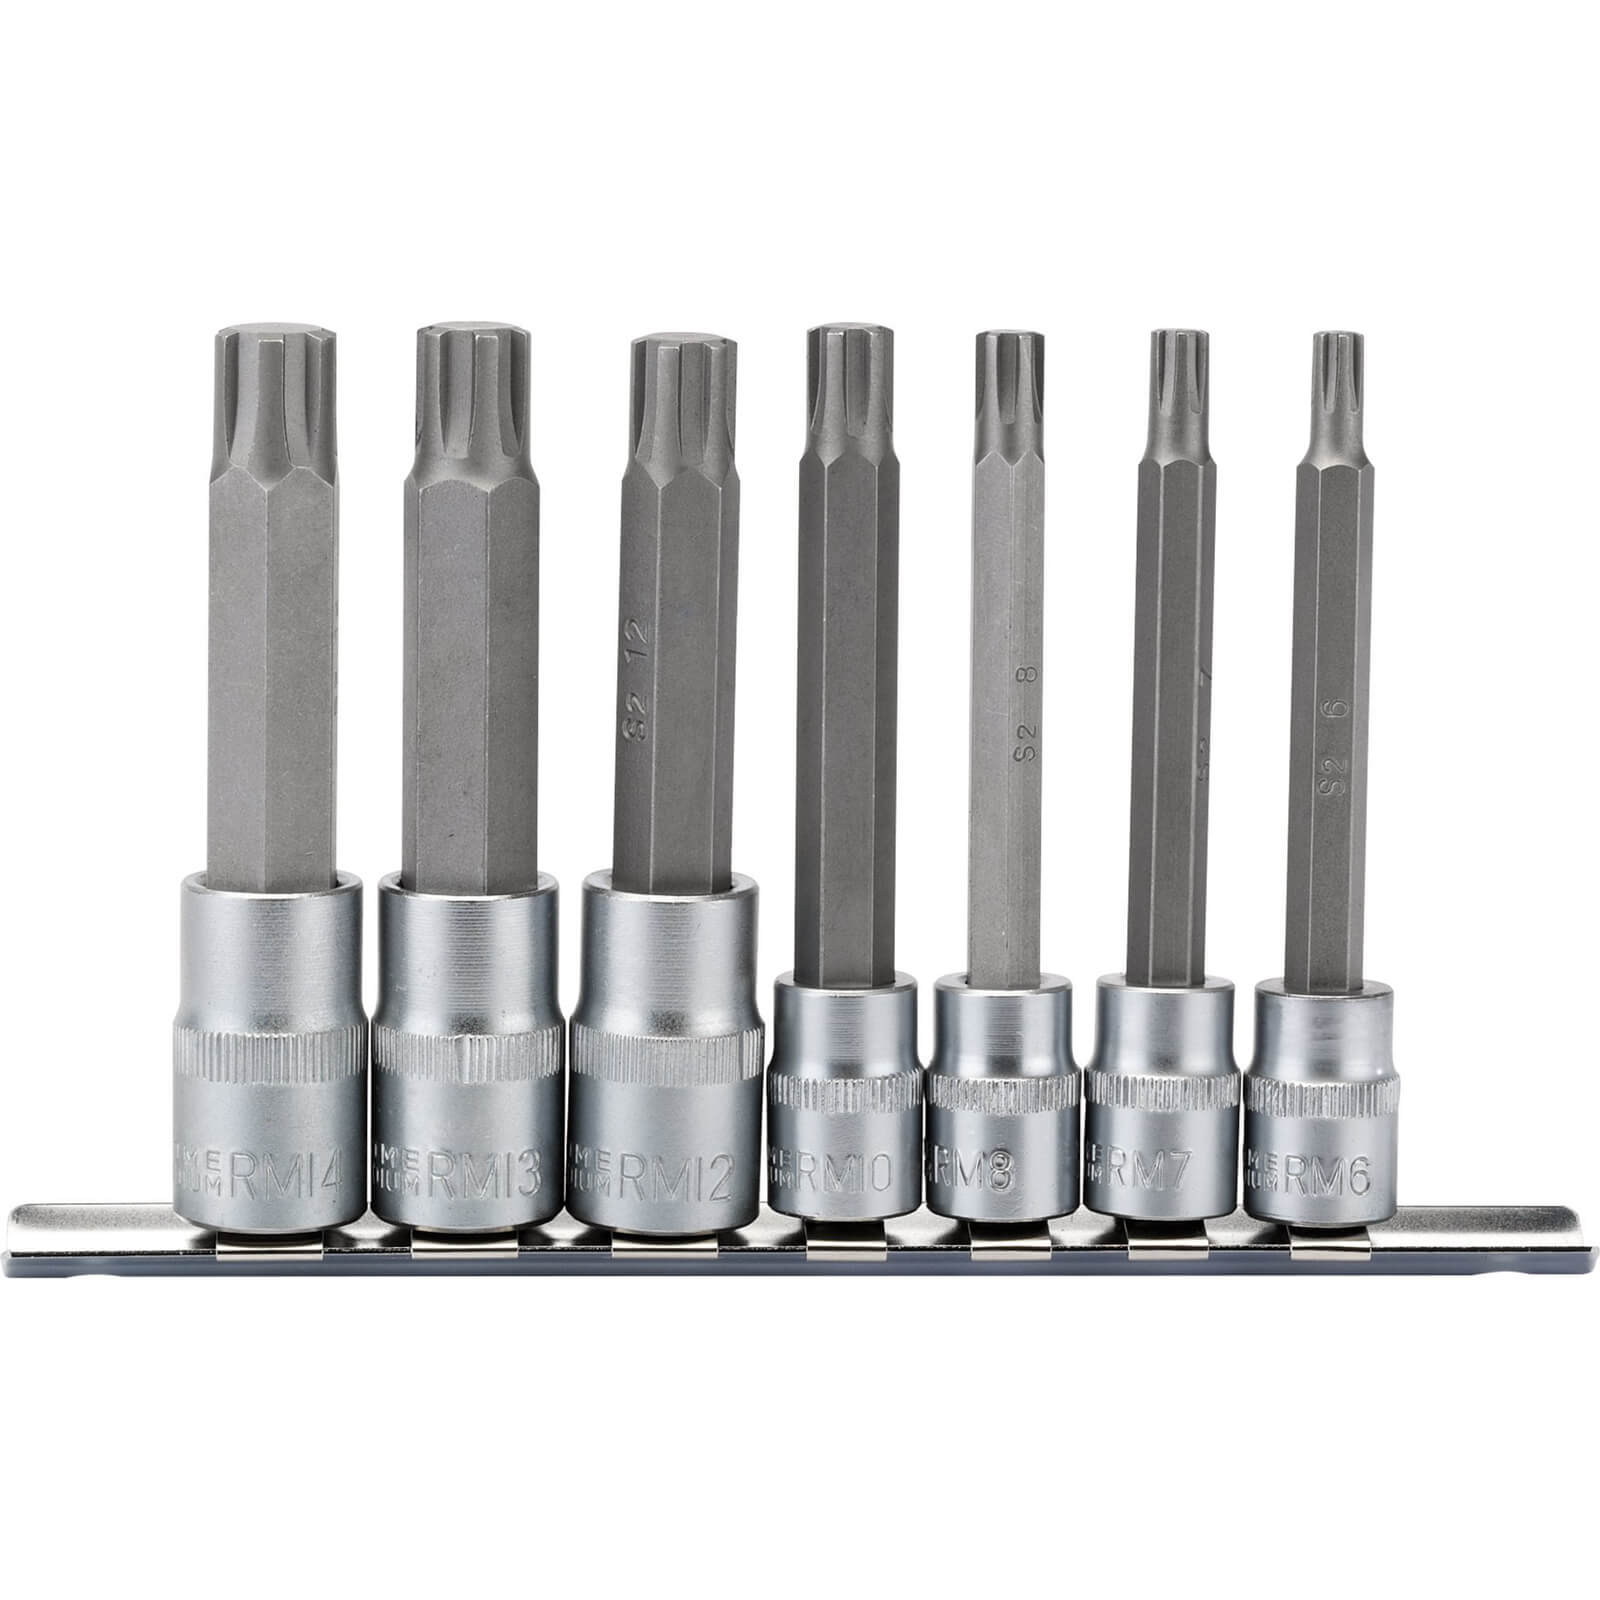 Image of Draper 7 Piece 3/8" and 1/2" Drive Ribe Socket and Bit Set Combination 100mm